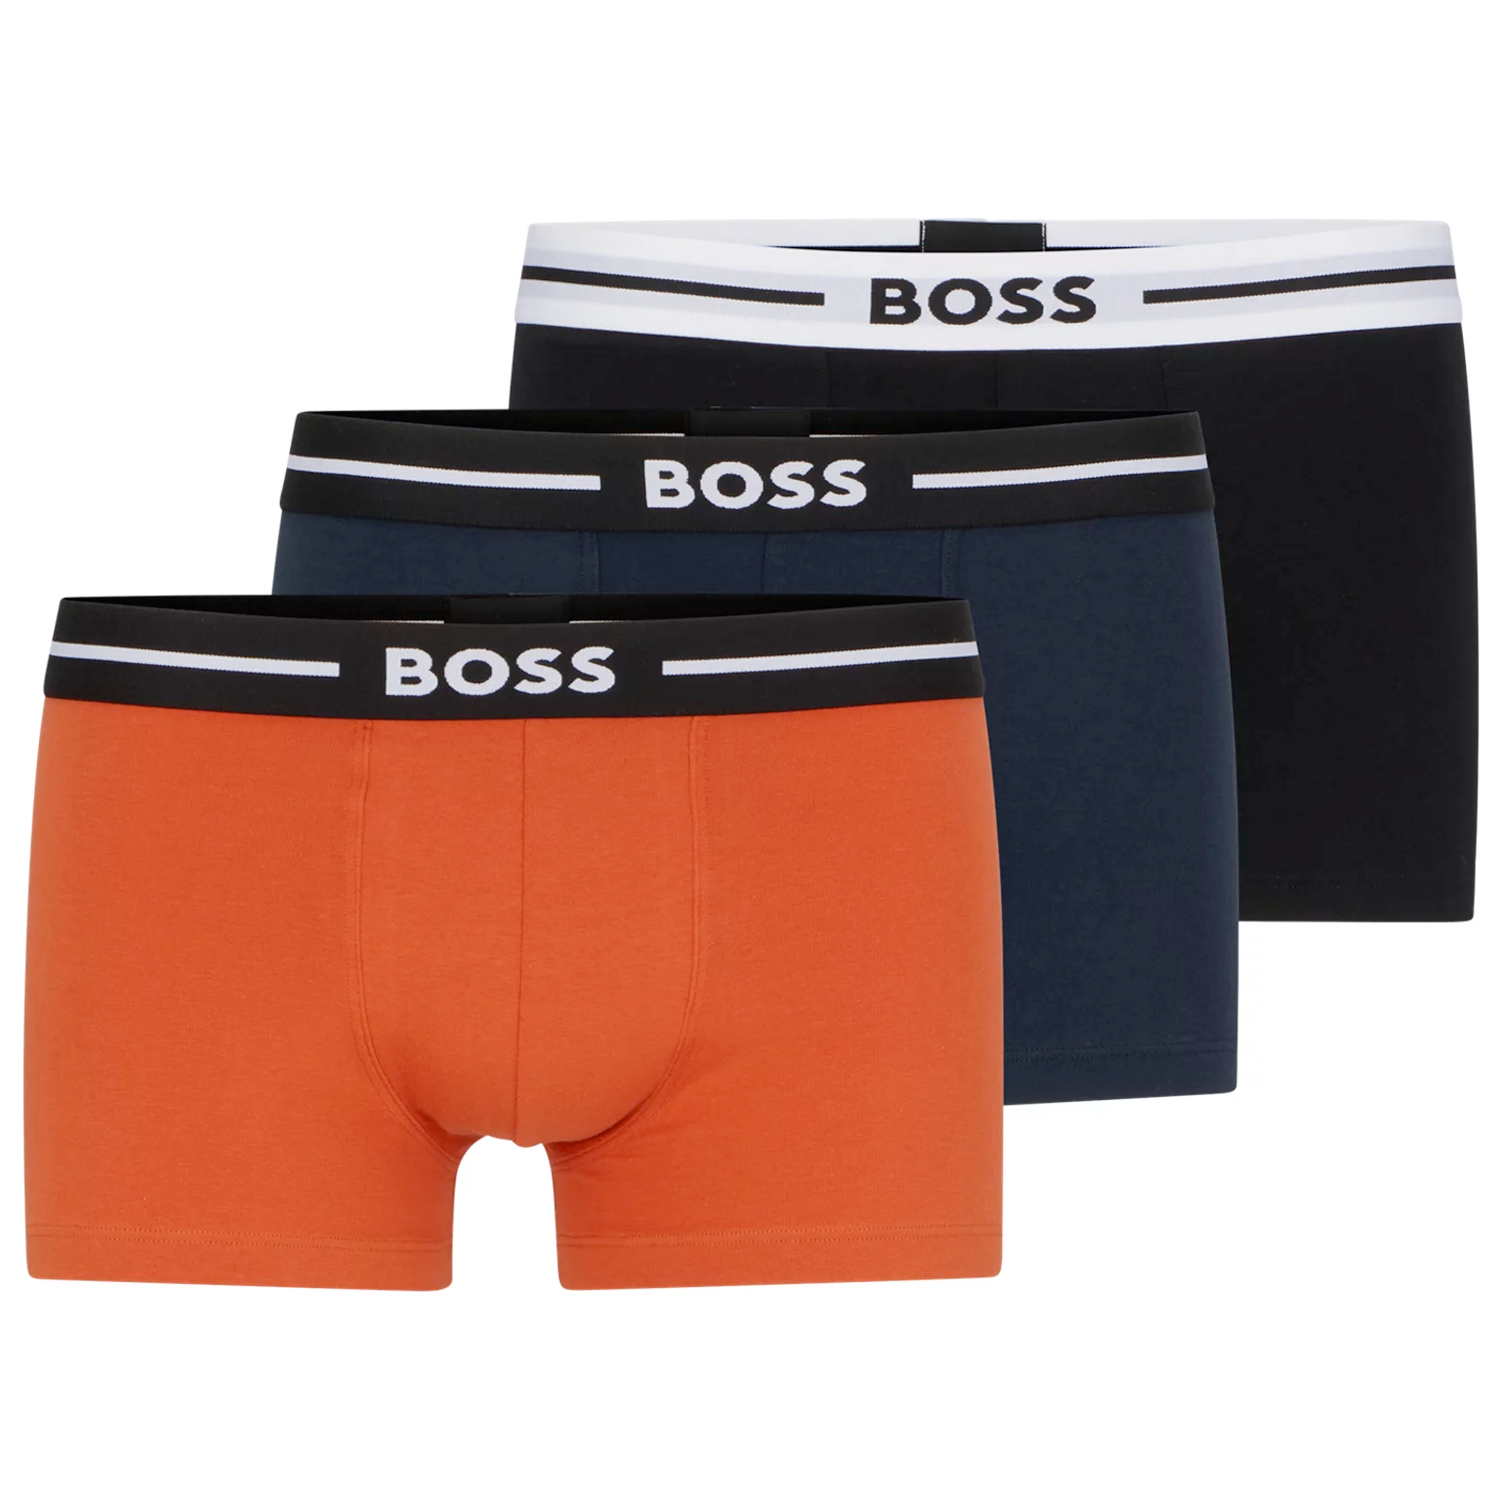 Image of BOSS Stretch Cotton Trunks 3 Pack